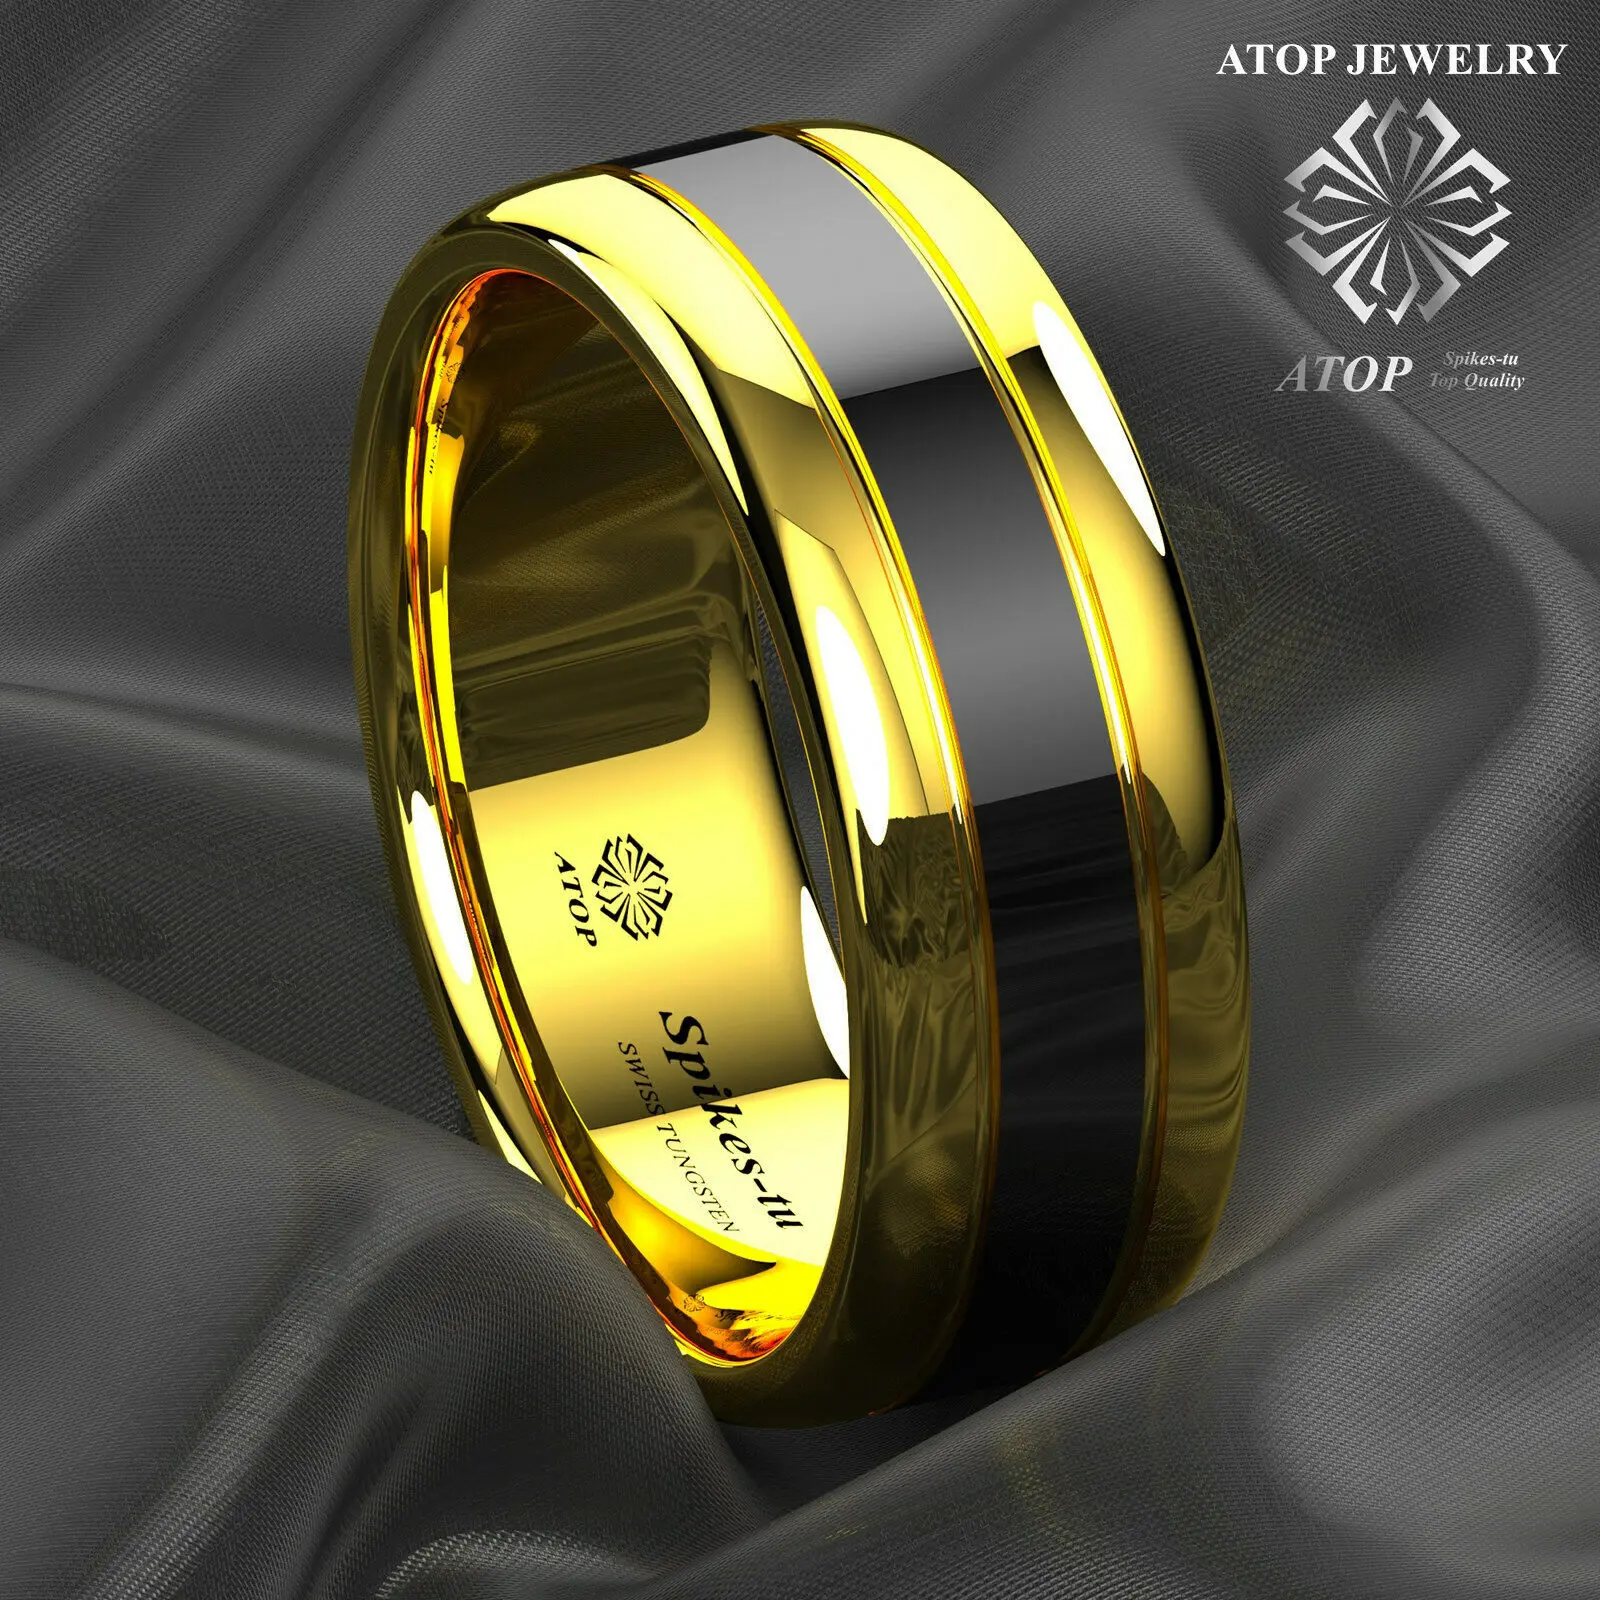 ATOP 8mm Men's Jewelry Black Dome Gold Tungsten Ring Wedding ring Bridal Free Shipping